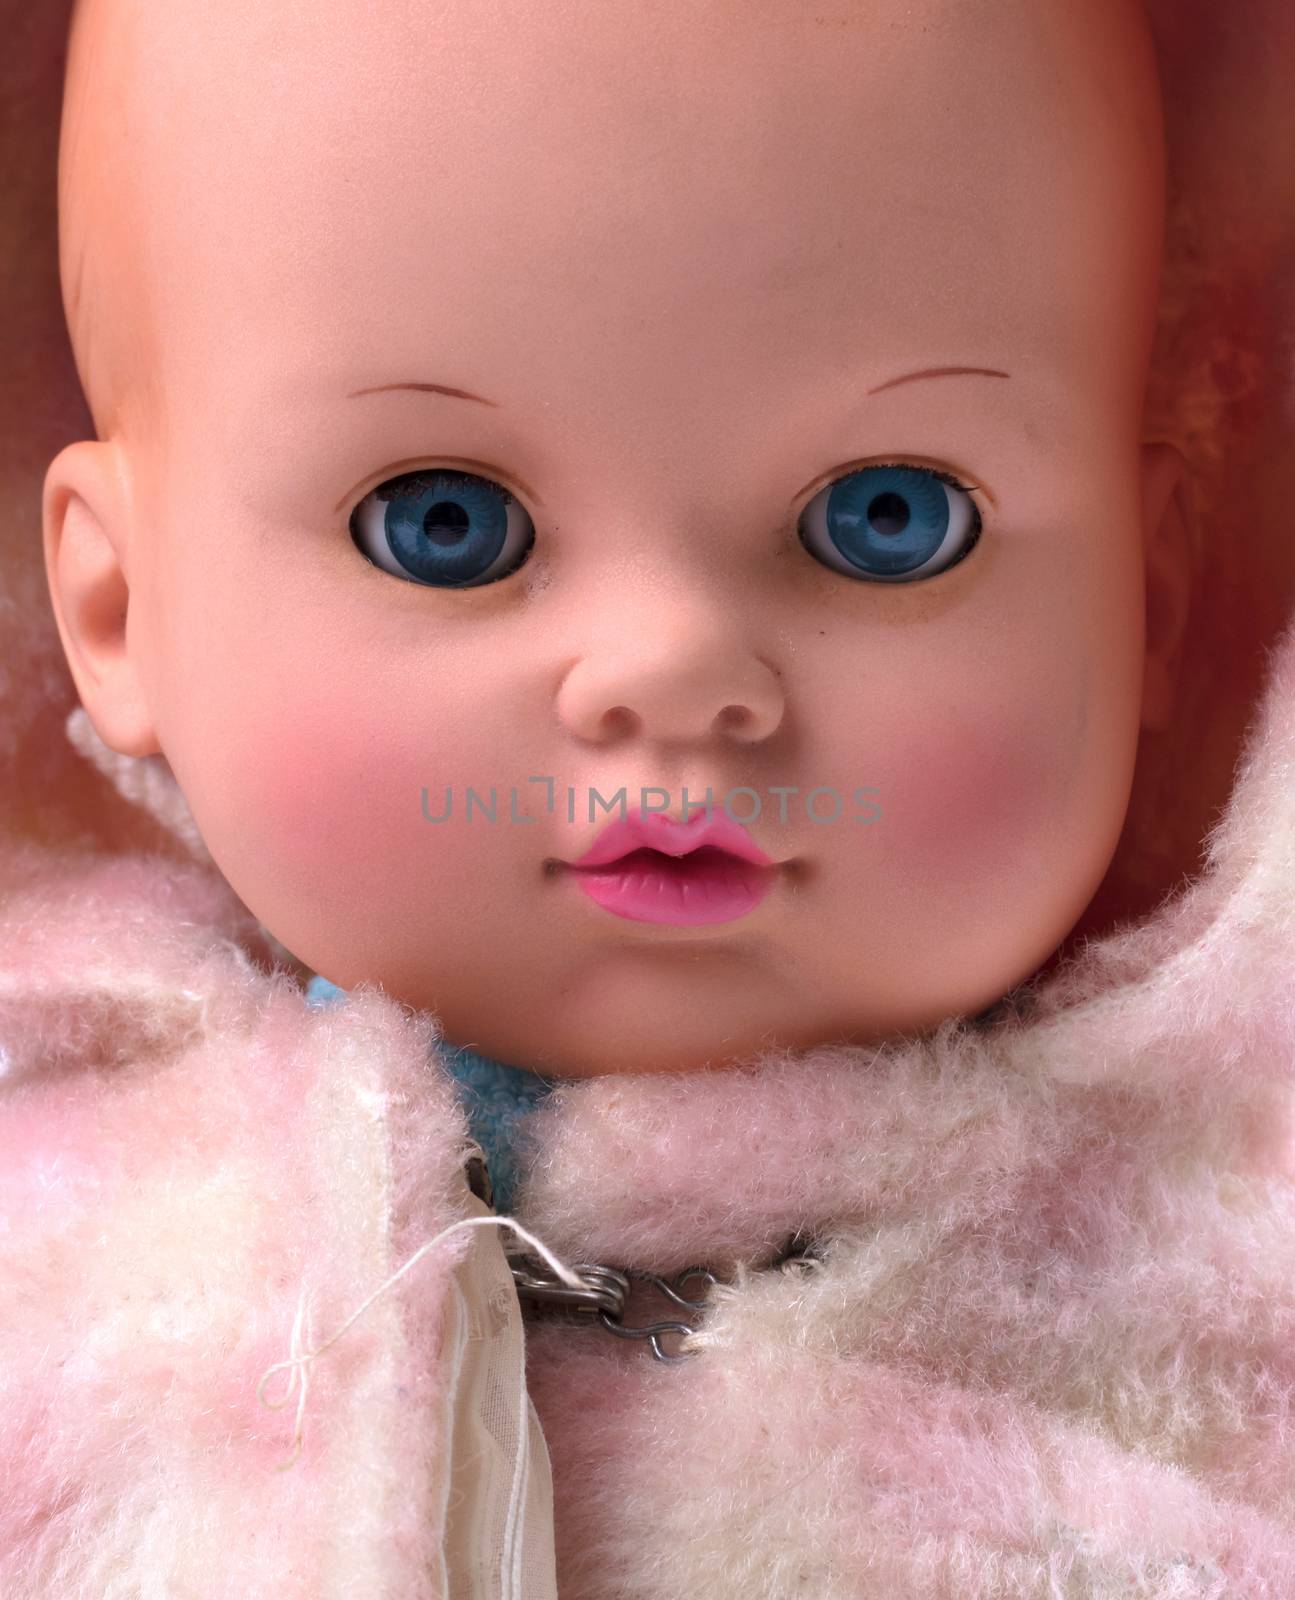 Very old baby doll (1940s), made with authentic clothing, isolated